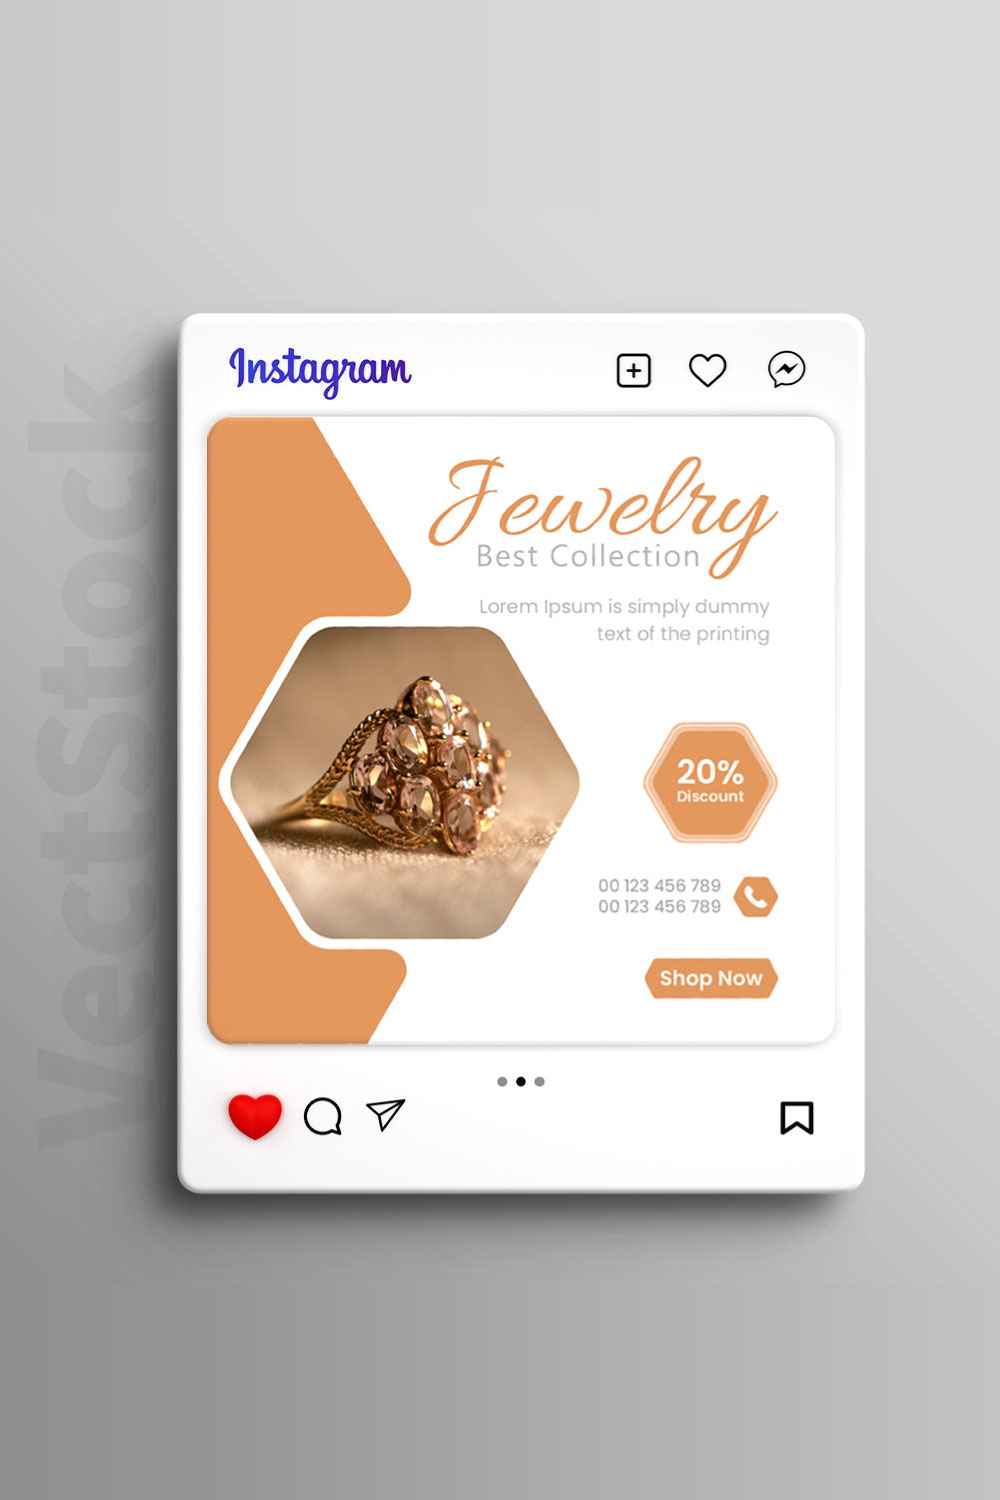 Jewellery collection beauty social media instagram post editable template pinterest preview image.